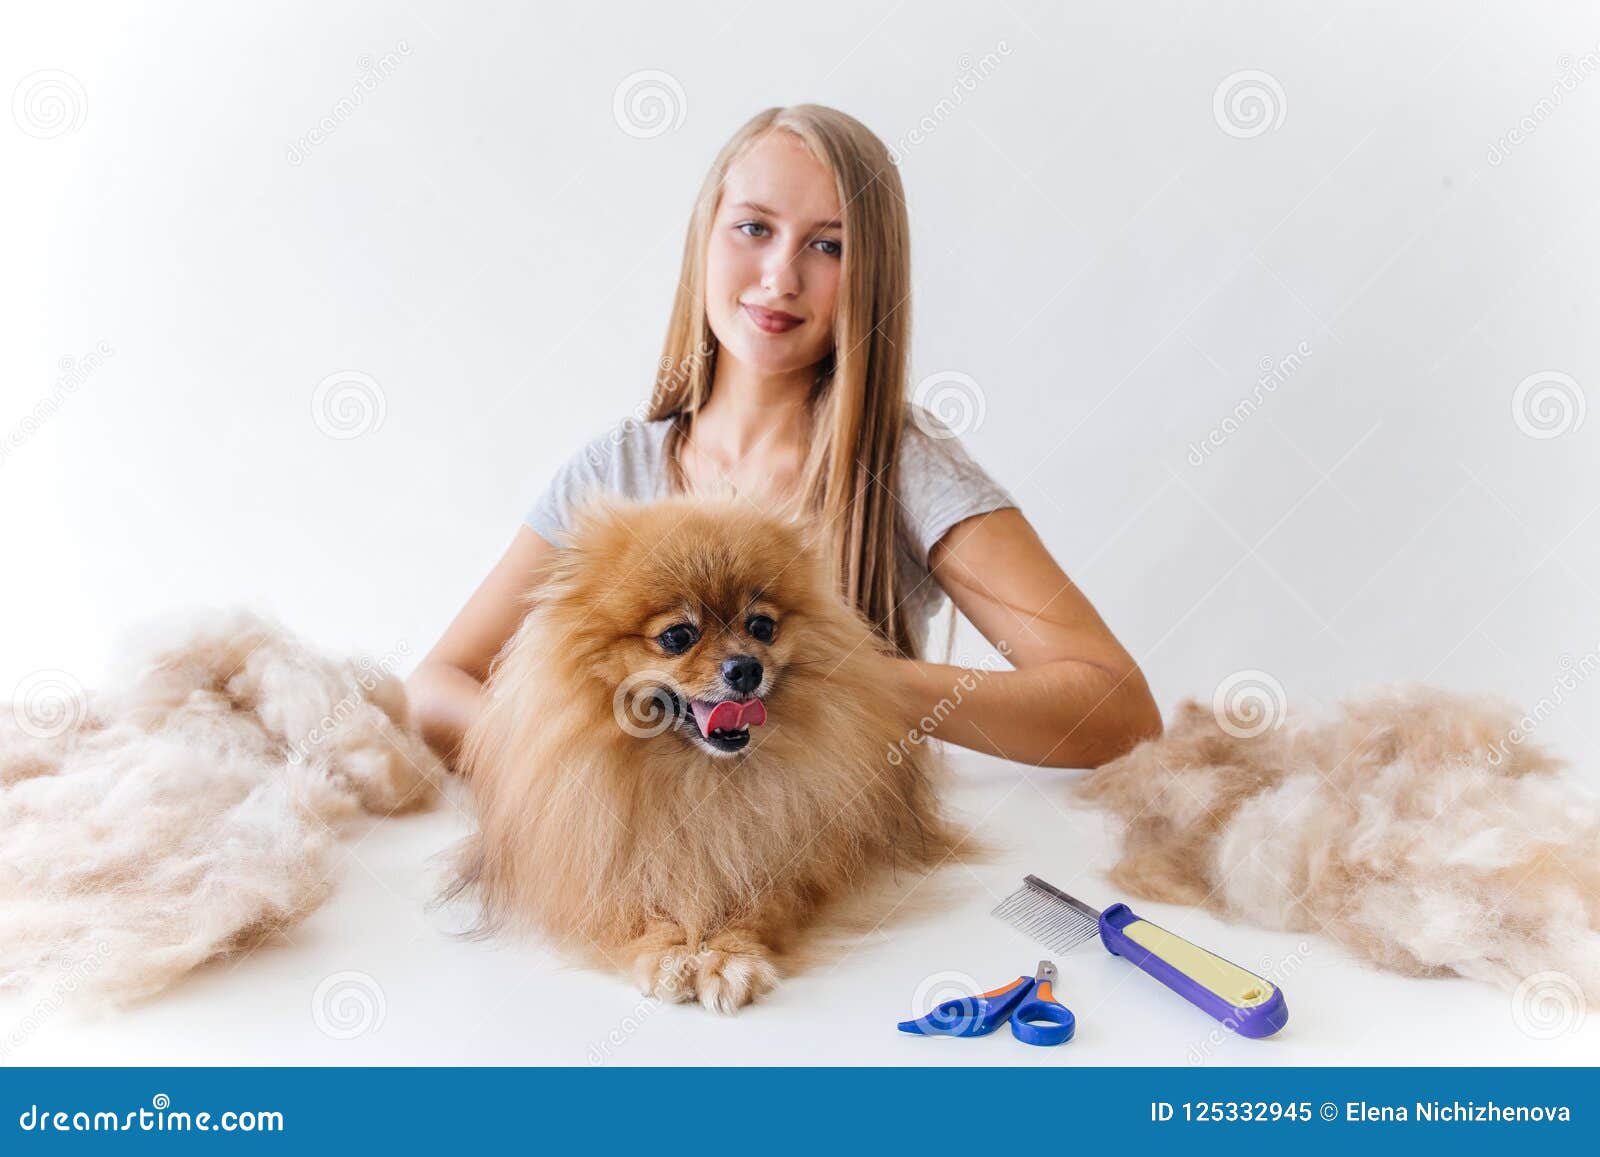 A Portrait Of A Professional Dog Hairdresser Grooming A Dog Stock